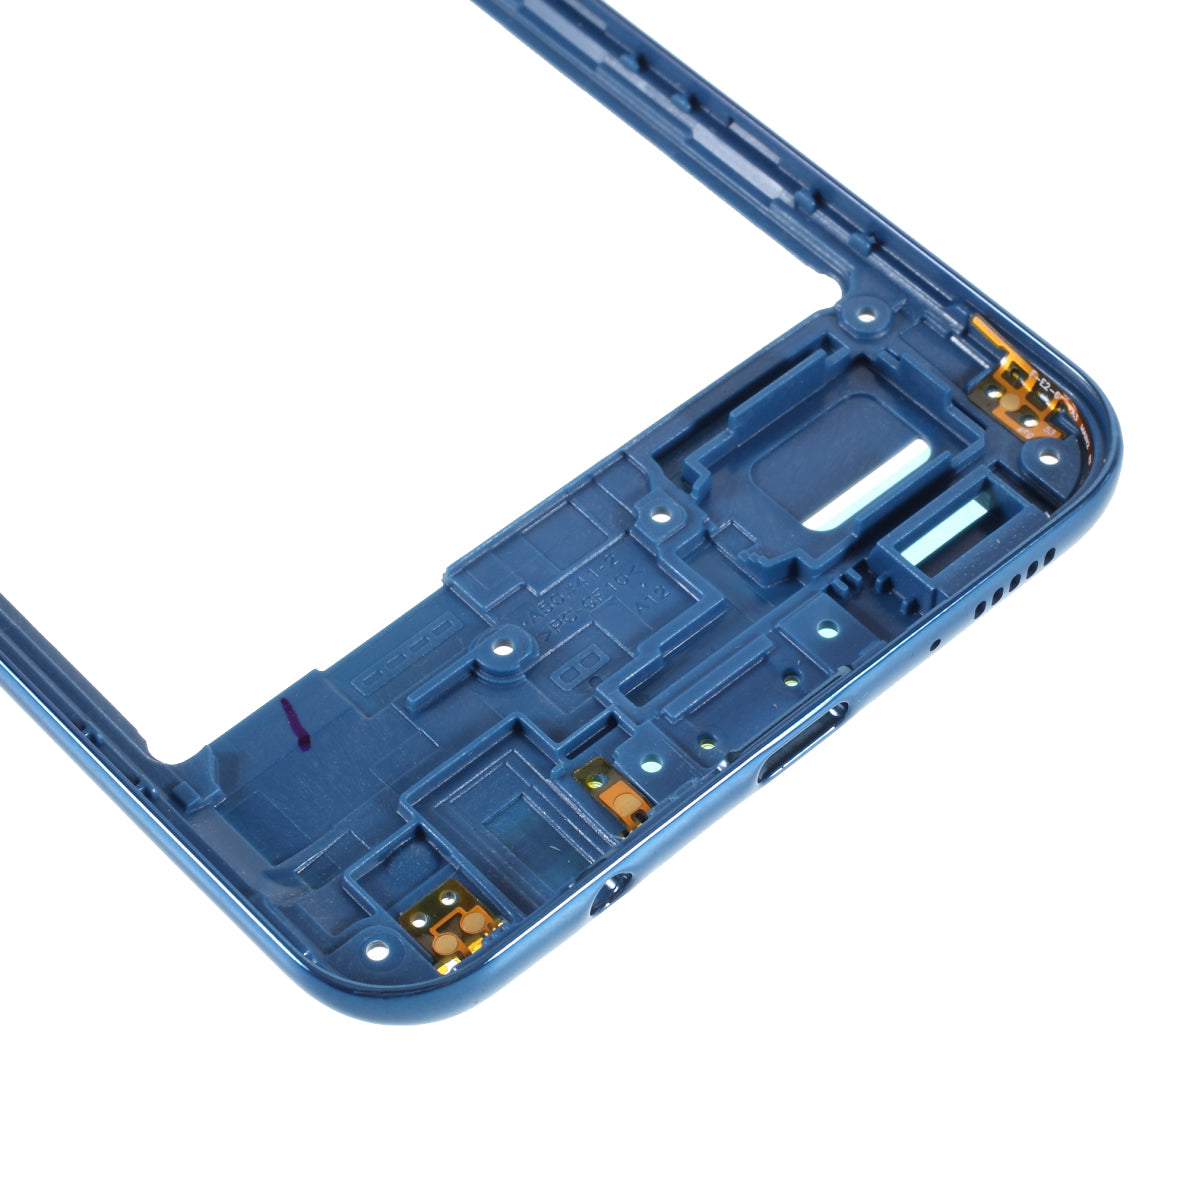 OEM Middle Plate Frame Repair Part for Samsung Galaxy A50 SM-A505 - Blue